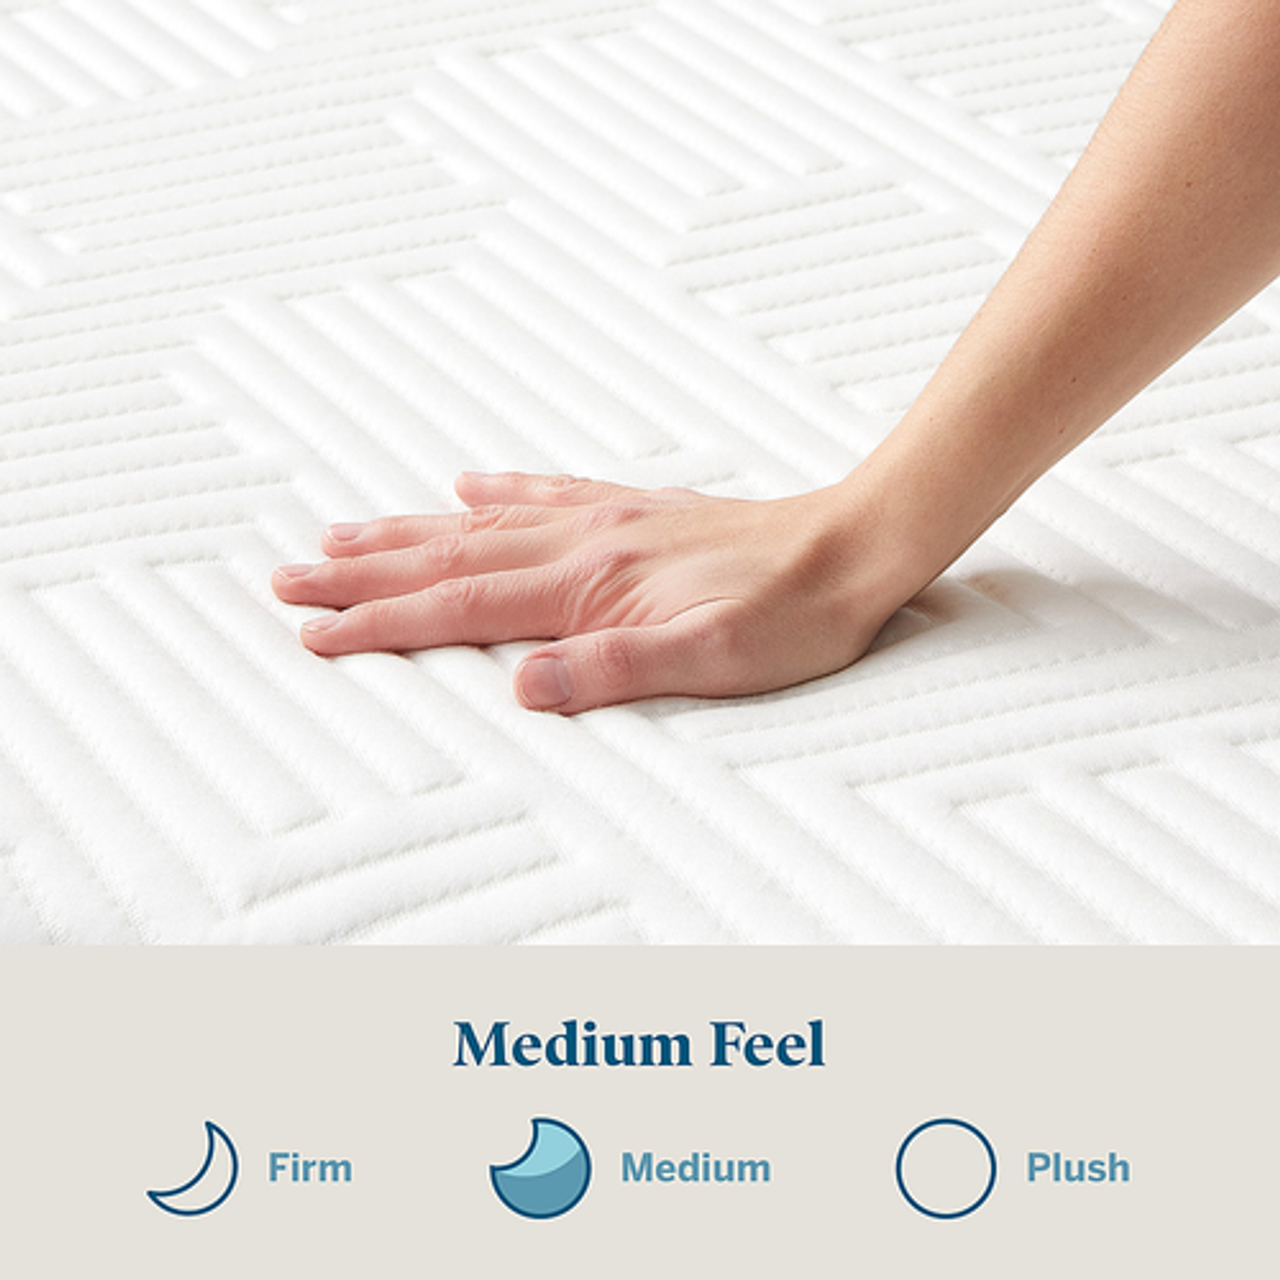 Lucid Comfort Collection - 10-inch Memory Foam Hybrid Mattress - Twin XL - White